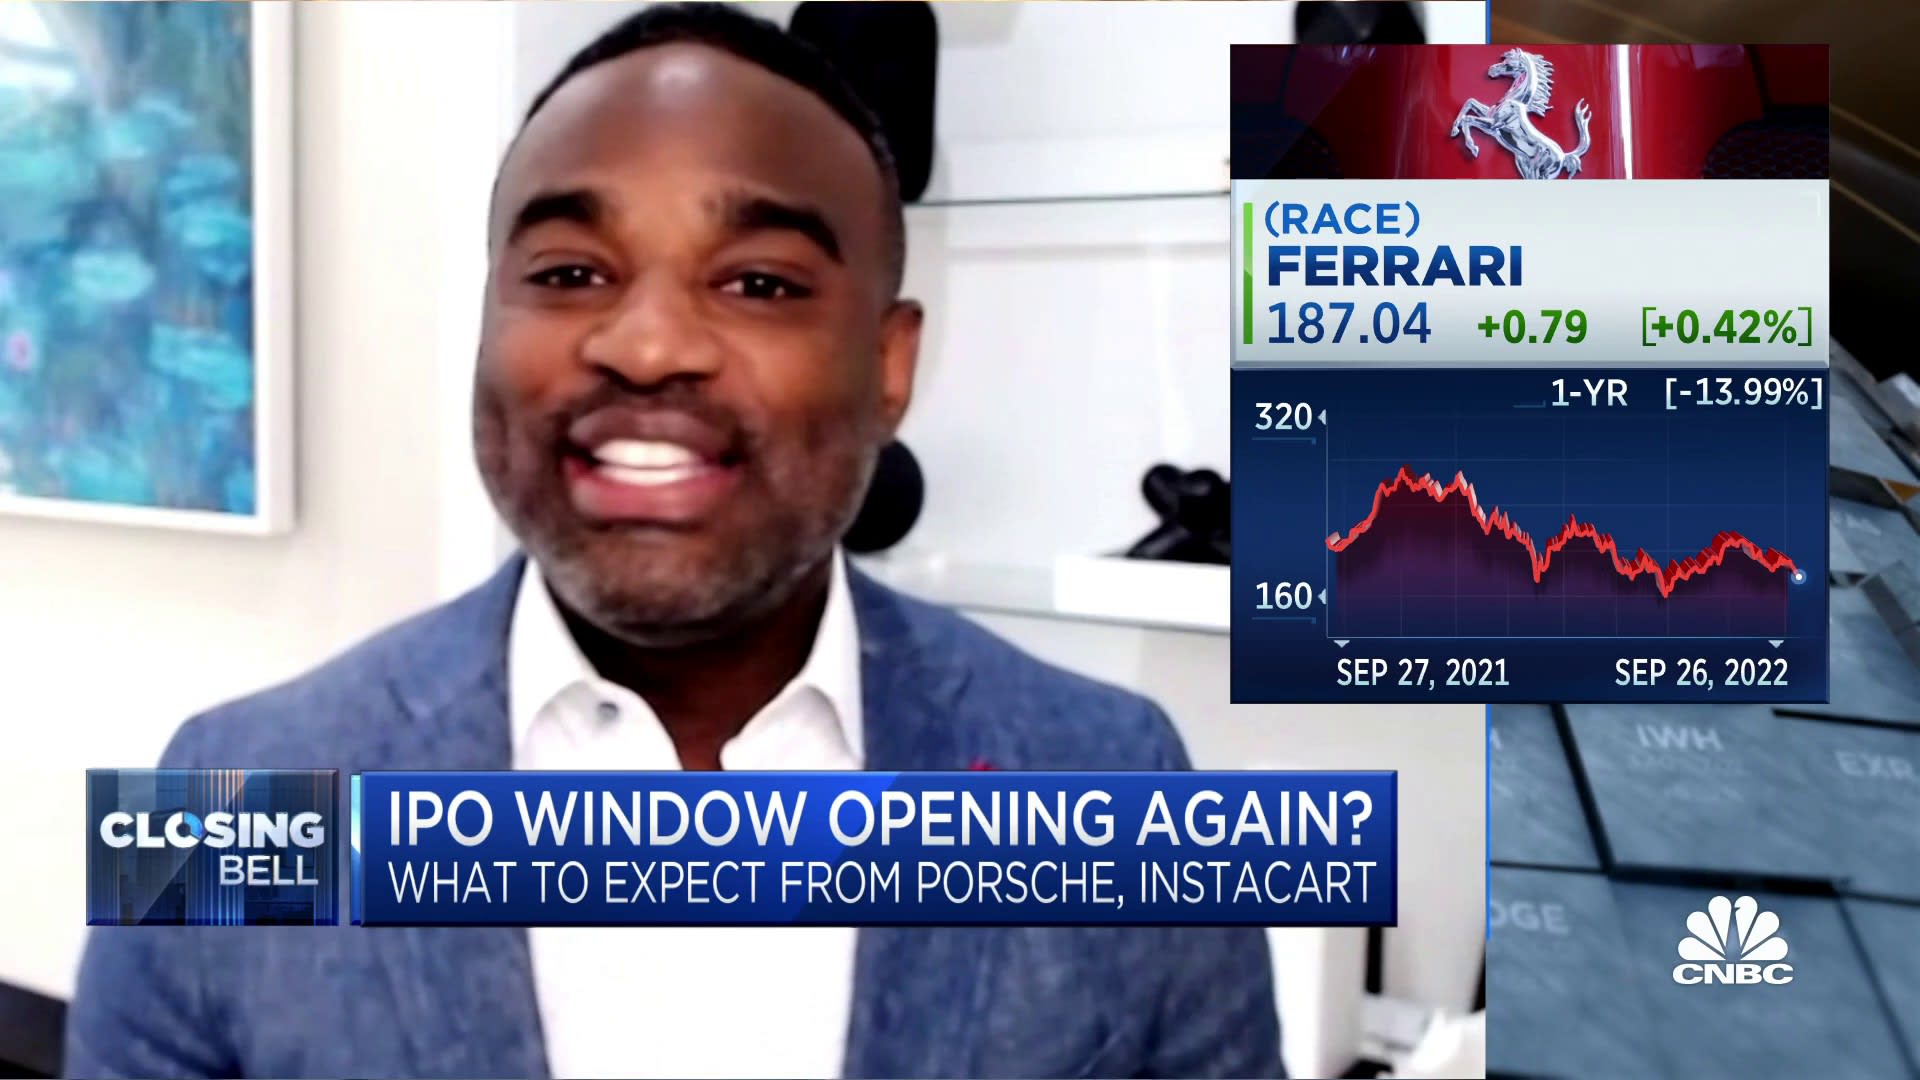 IPO valuations in private market are likely higher than public, says MVP’s Rashaun Williams